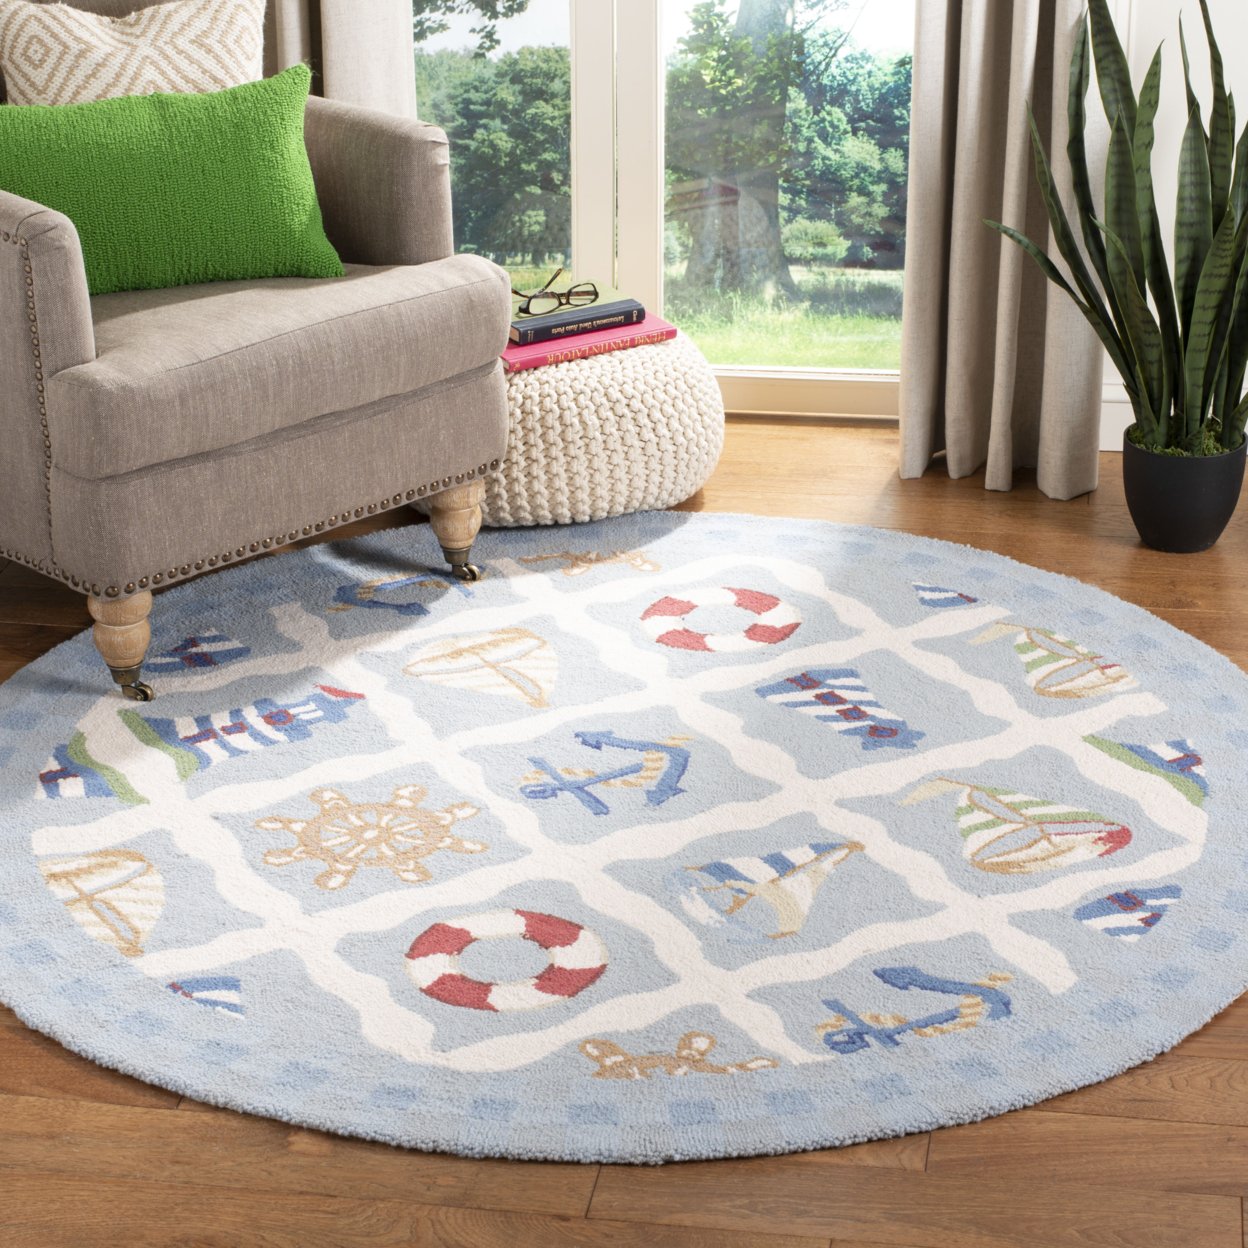 SAFAVIEH Chelsea Collection HK239A Hand-hooked Ivory Rug - 3' Round